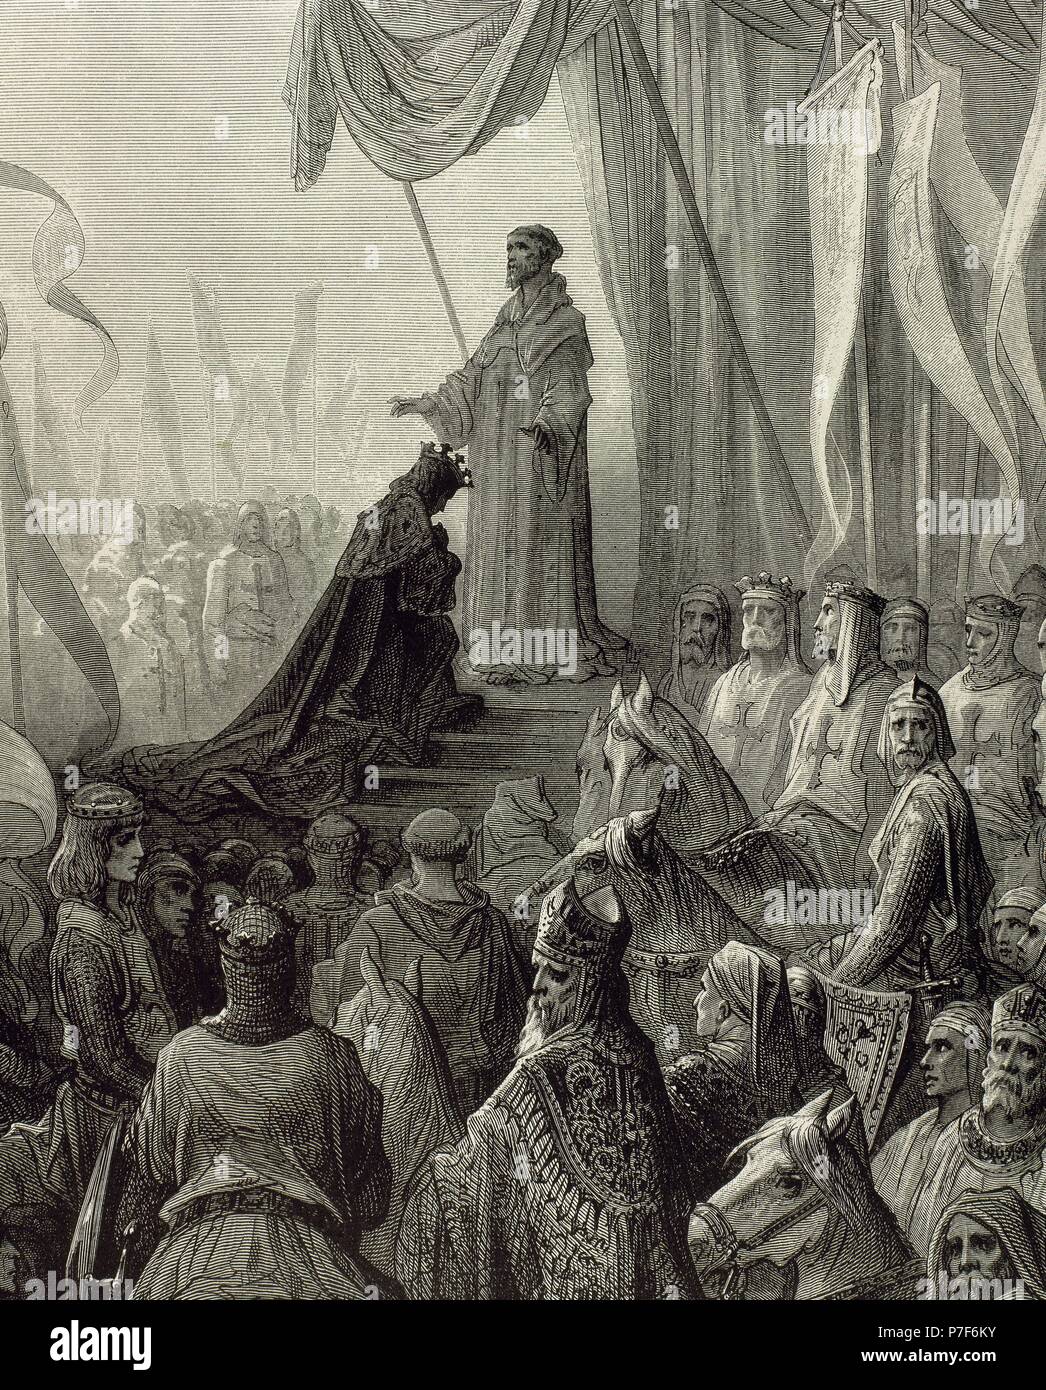 First Crusade (1096-1099). Crusaders receiving the blessing after the conquest of the citadel of Mosul, June 28, 1098. Engraving by Gustave Dore (1832-1883). Stock Photo